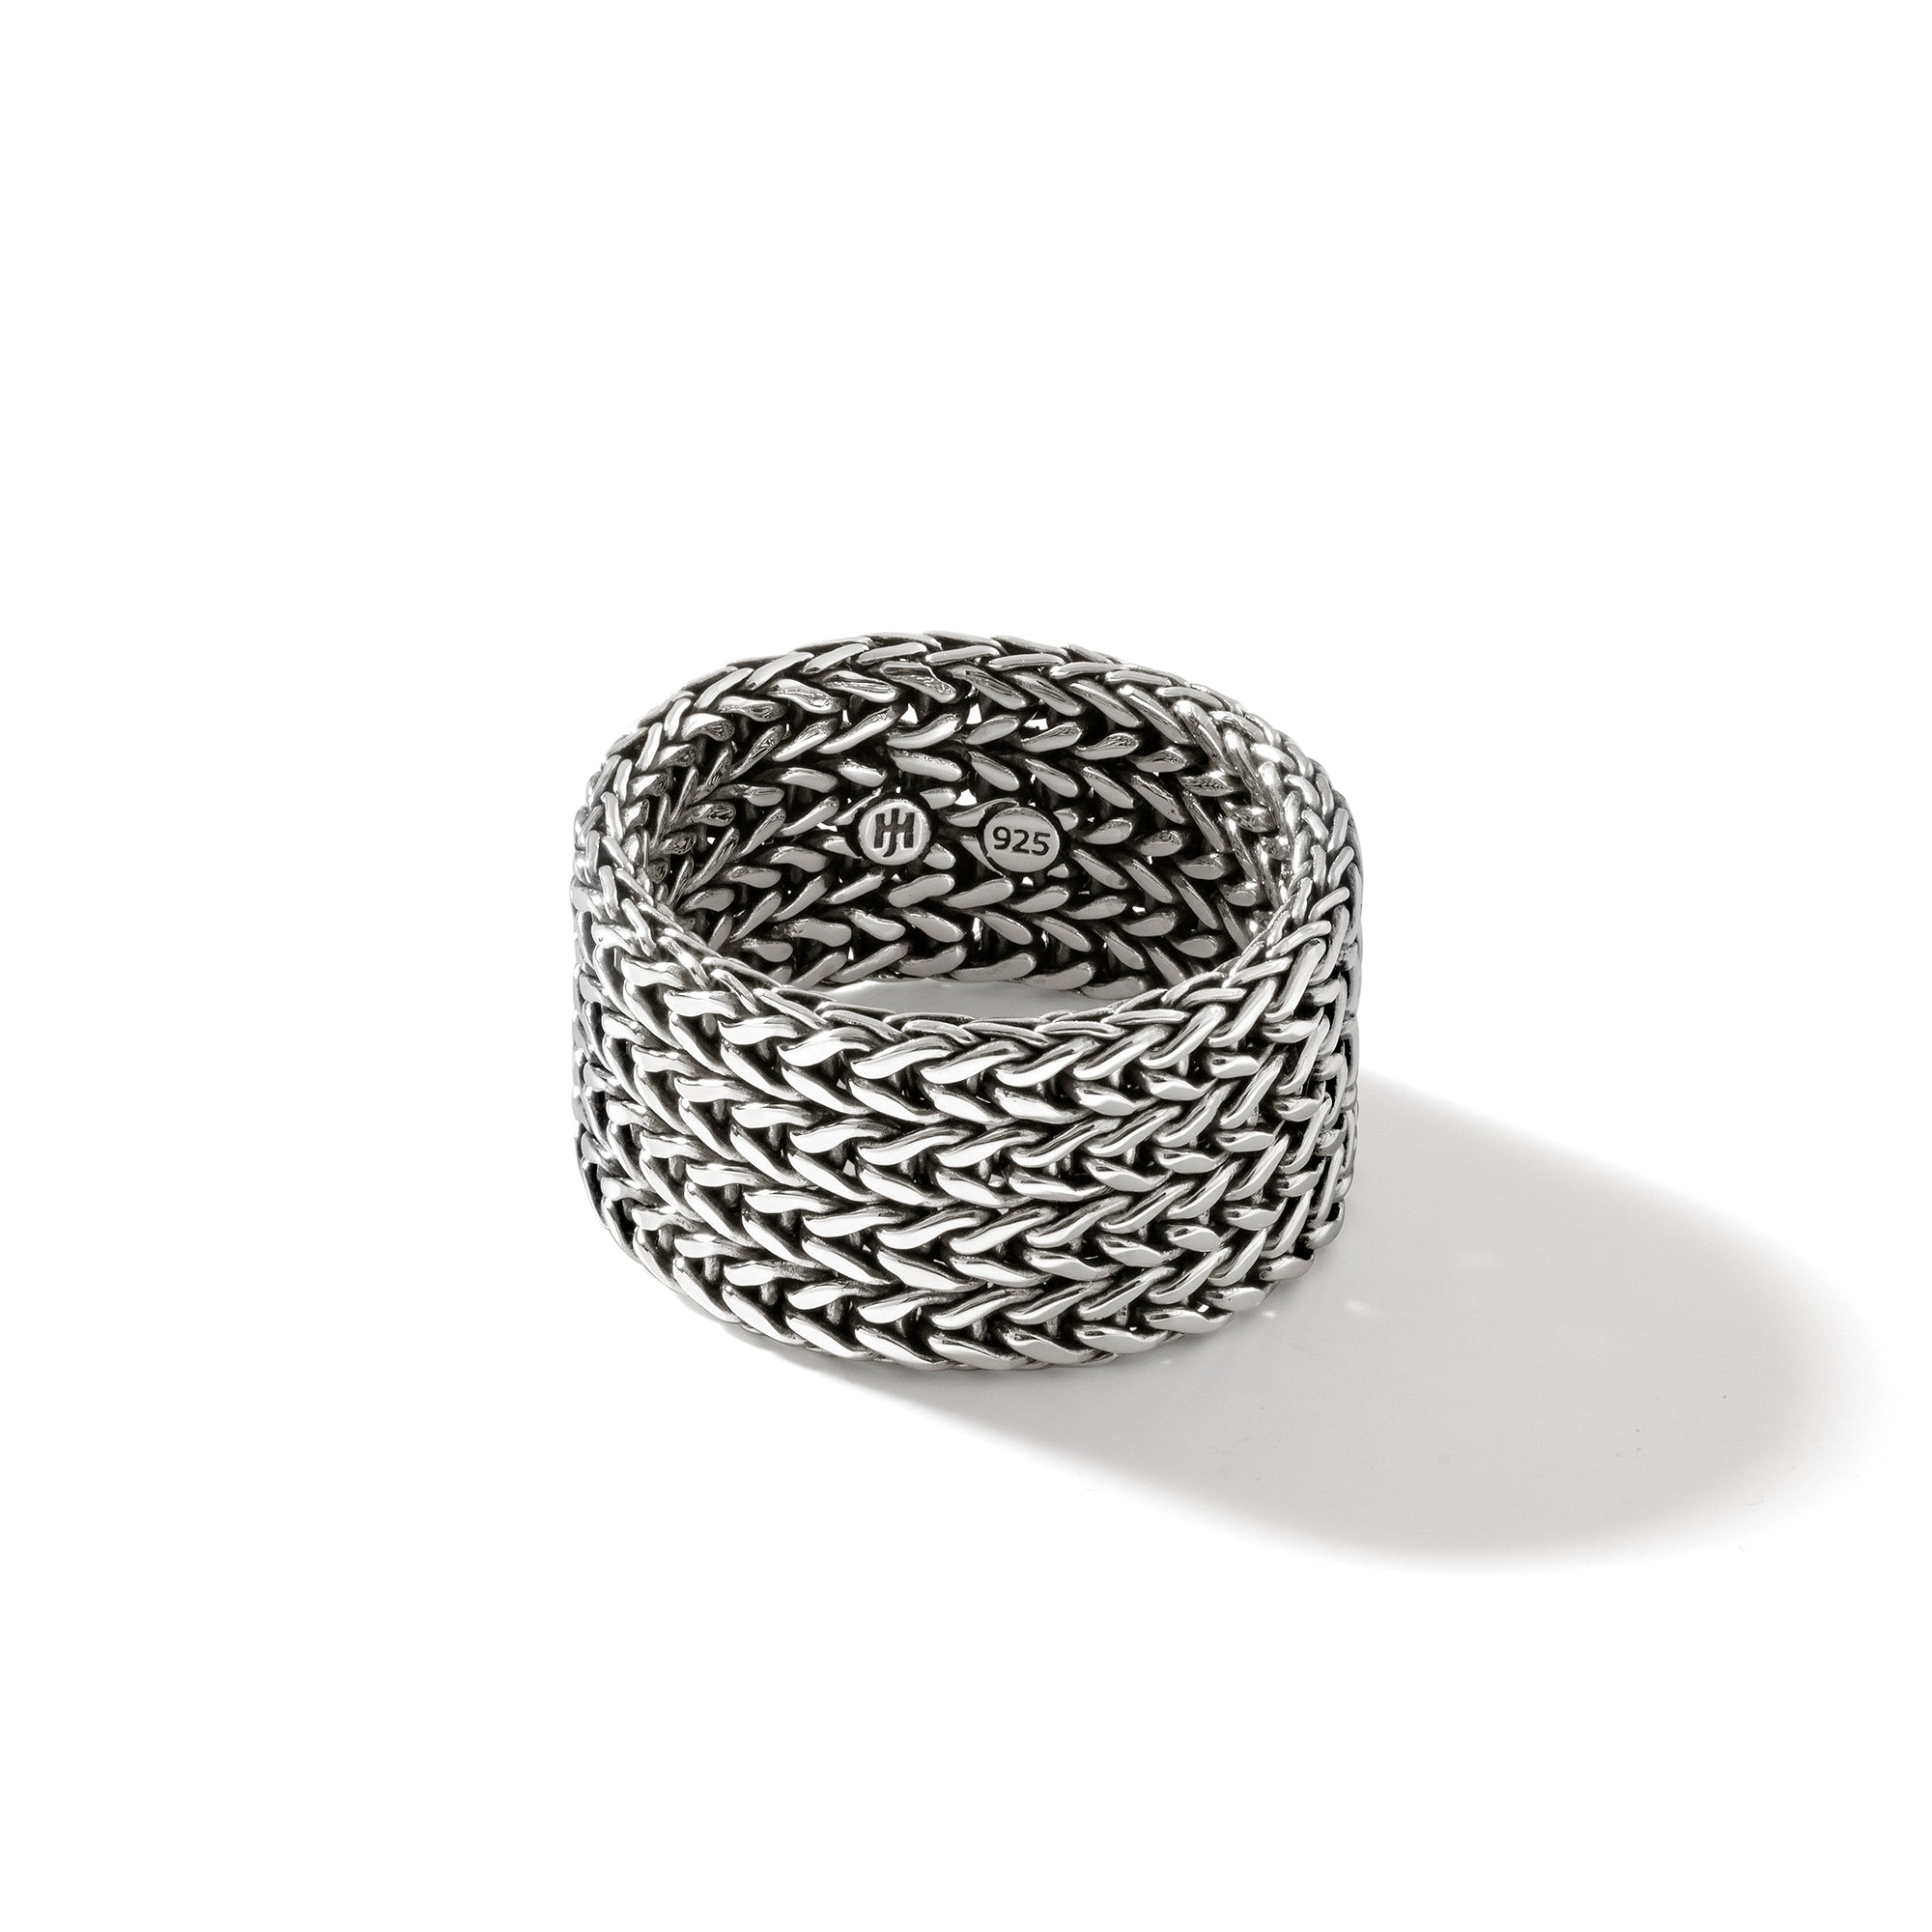 John Hardy Men's Rata Chain Band Ring in Sterling Silver